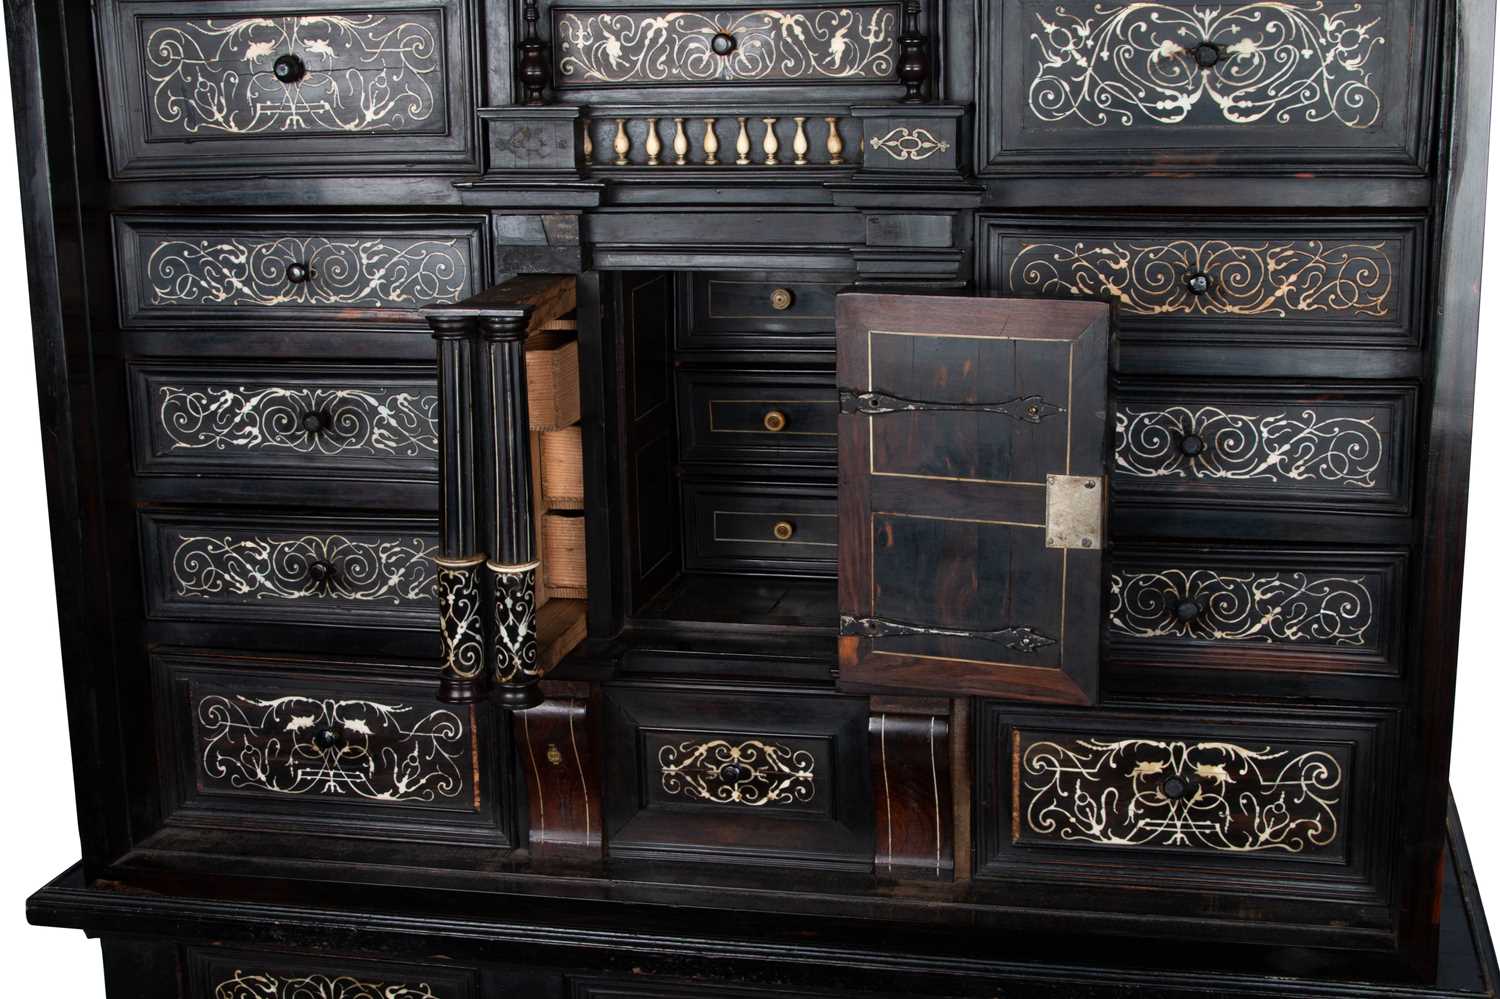 A LATE 17TH CENTURY EBONISED AND IVORY-INLAID CABINET ON STAND - Image 2 of 2